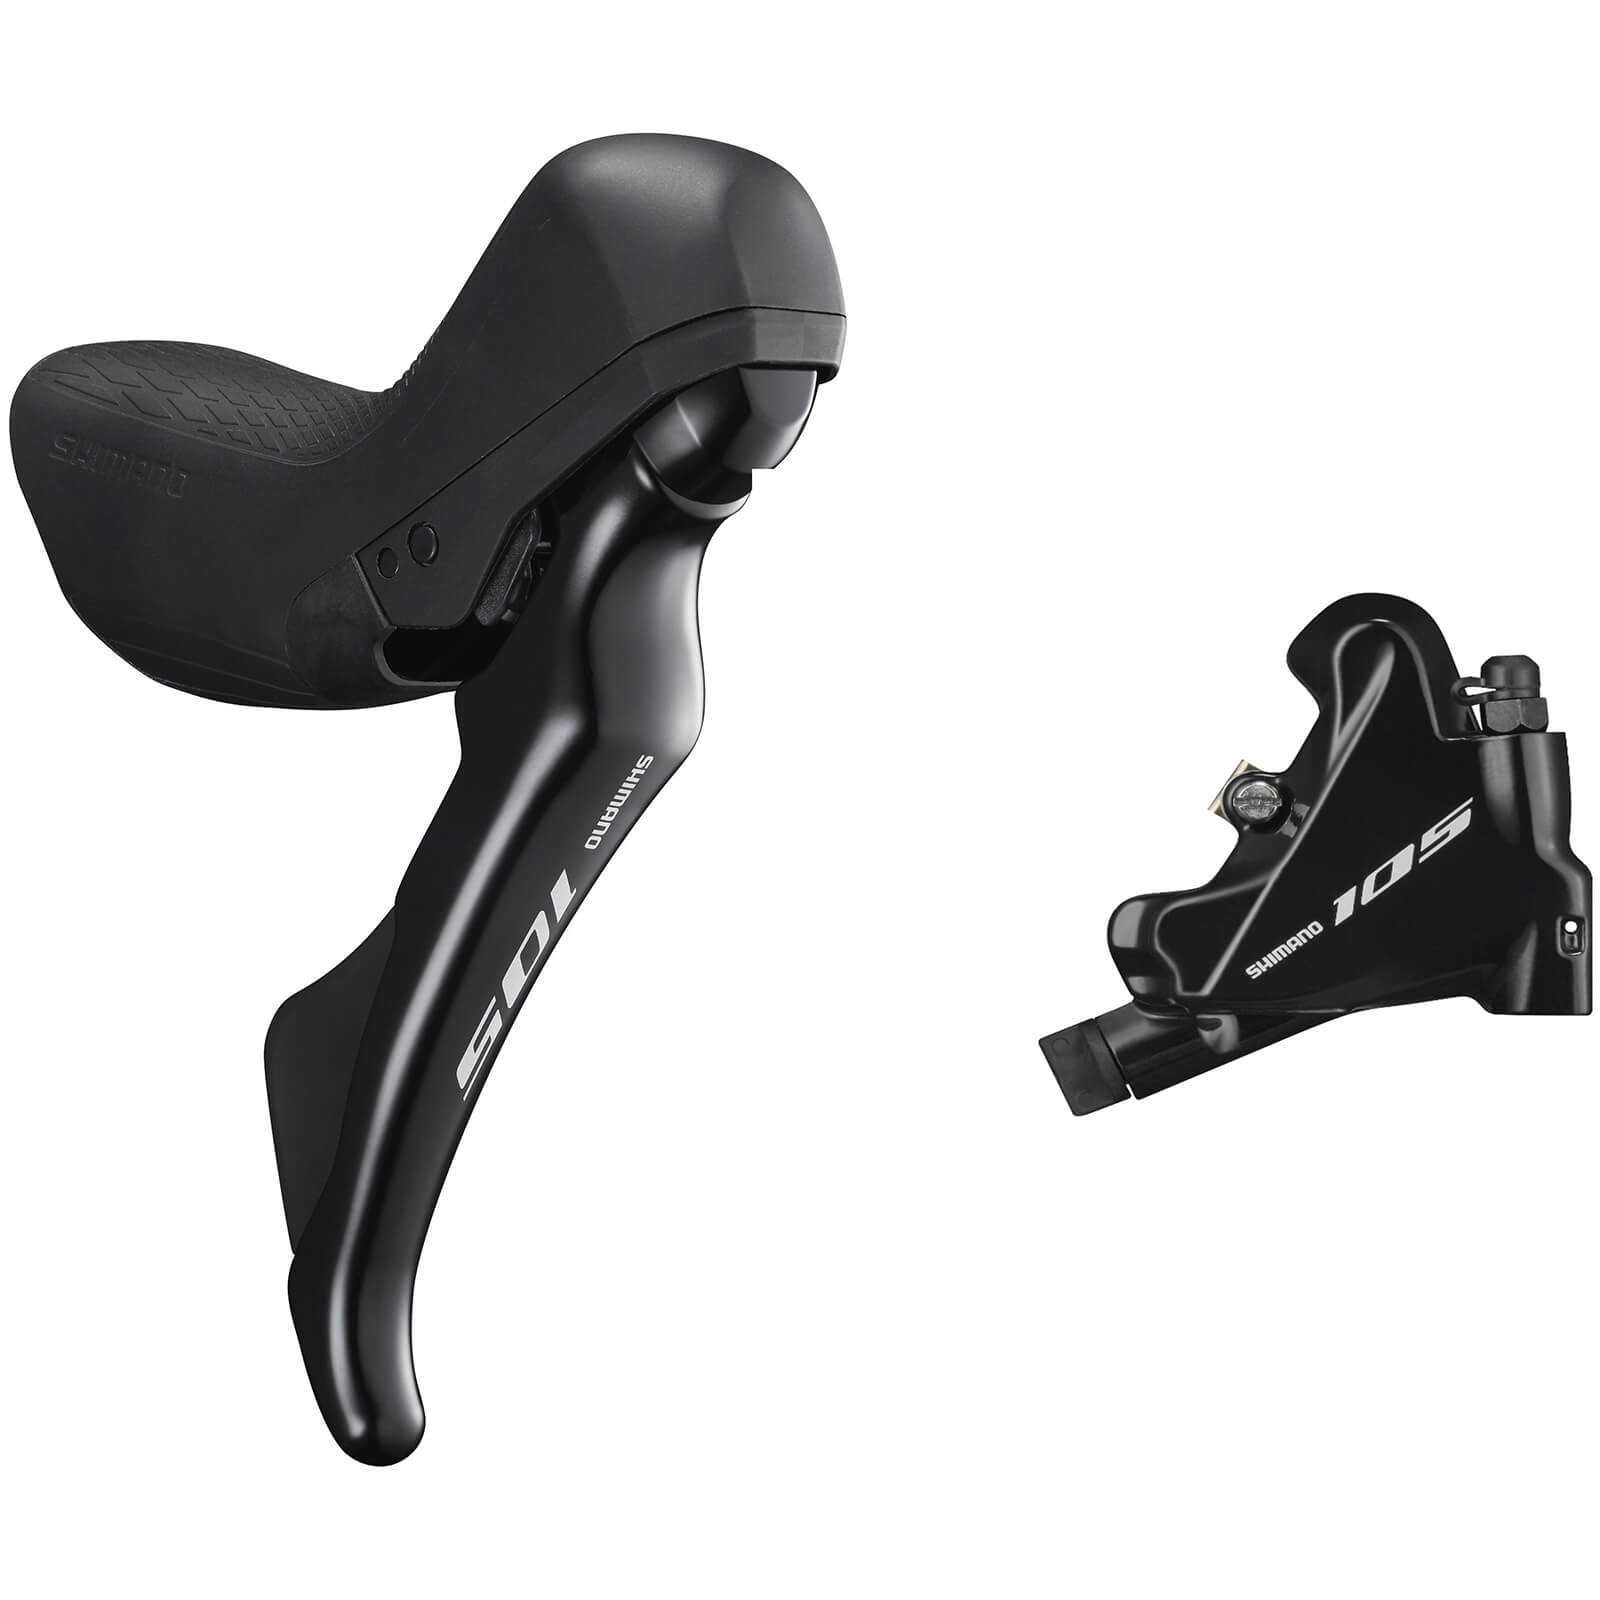 Shimano 105 ST-R7020 Hydraulic Brakes Mechanical Shifters with BR-R7070 Flat Mount Calipers - Left Rear - Schwarz